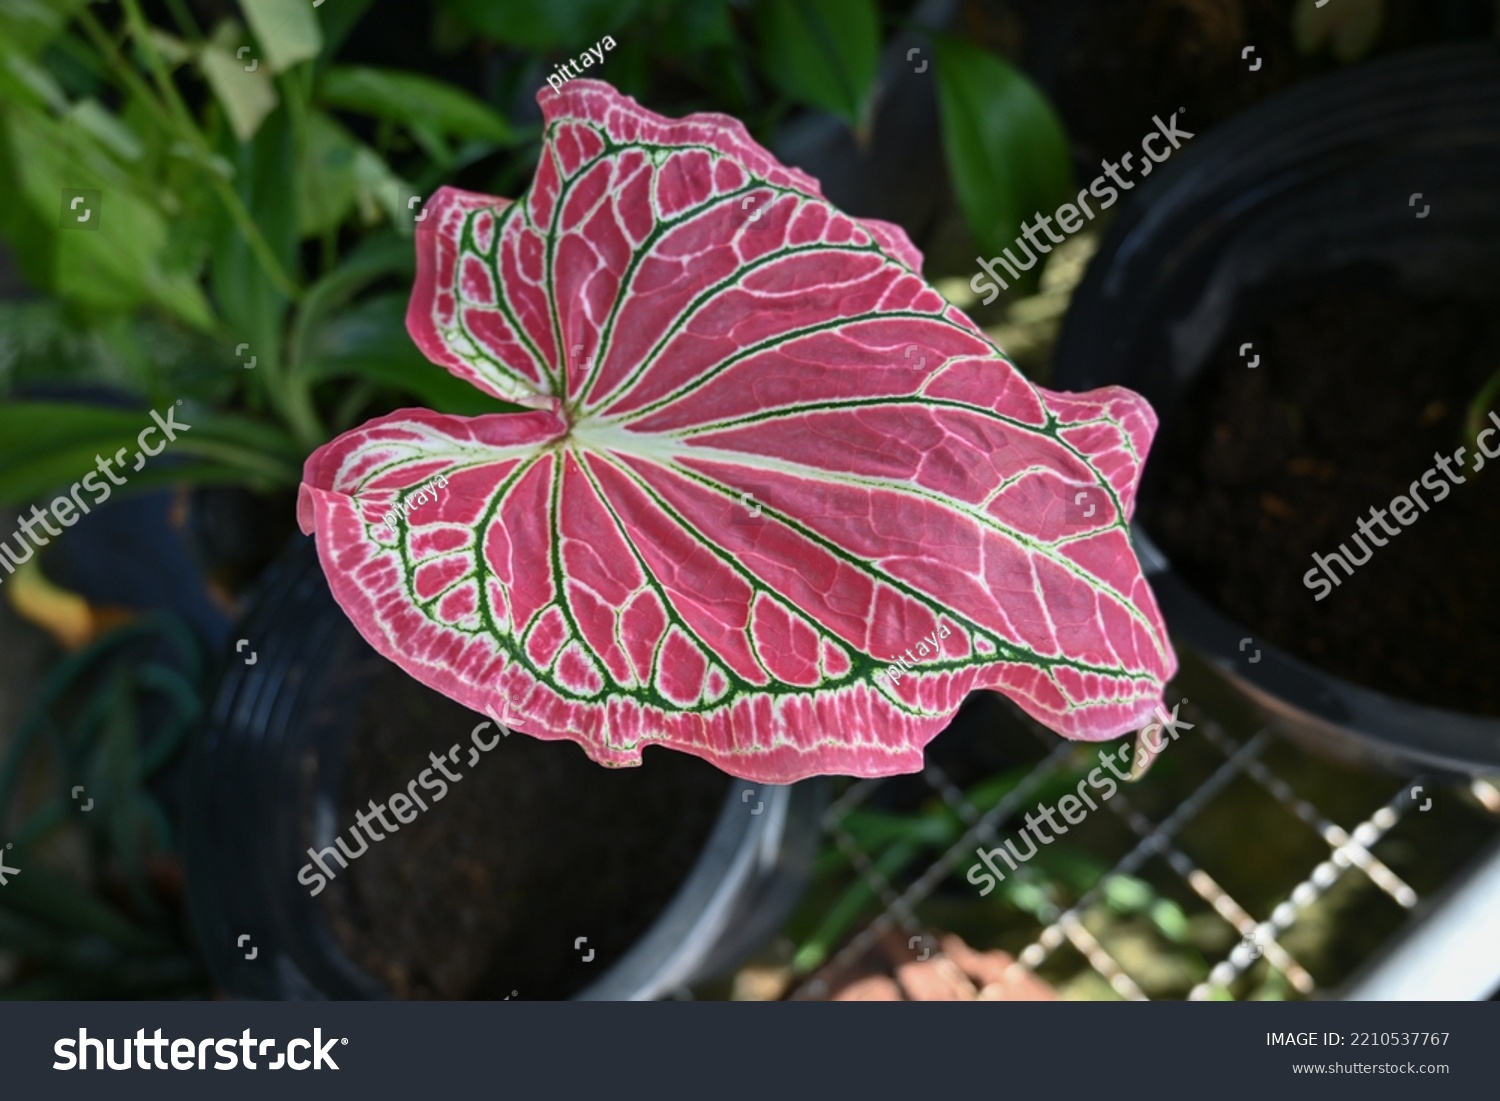 Close up view of  Caladium bicolor with pink leaf and green veins (Florida Sweetheart) #2210537767